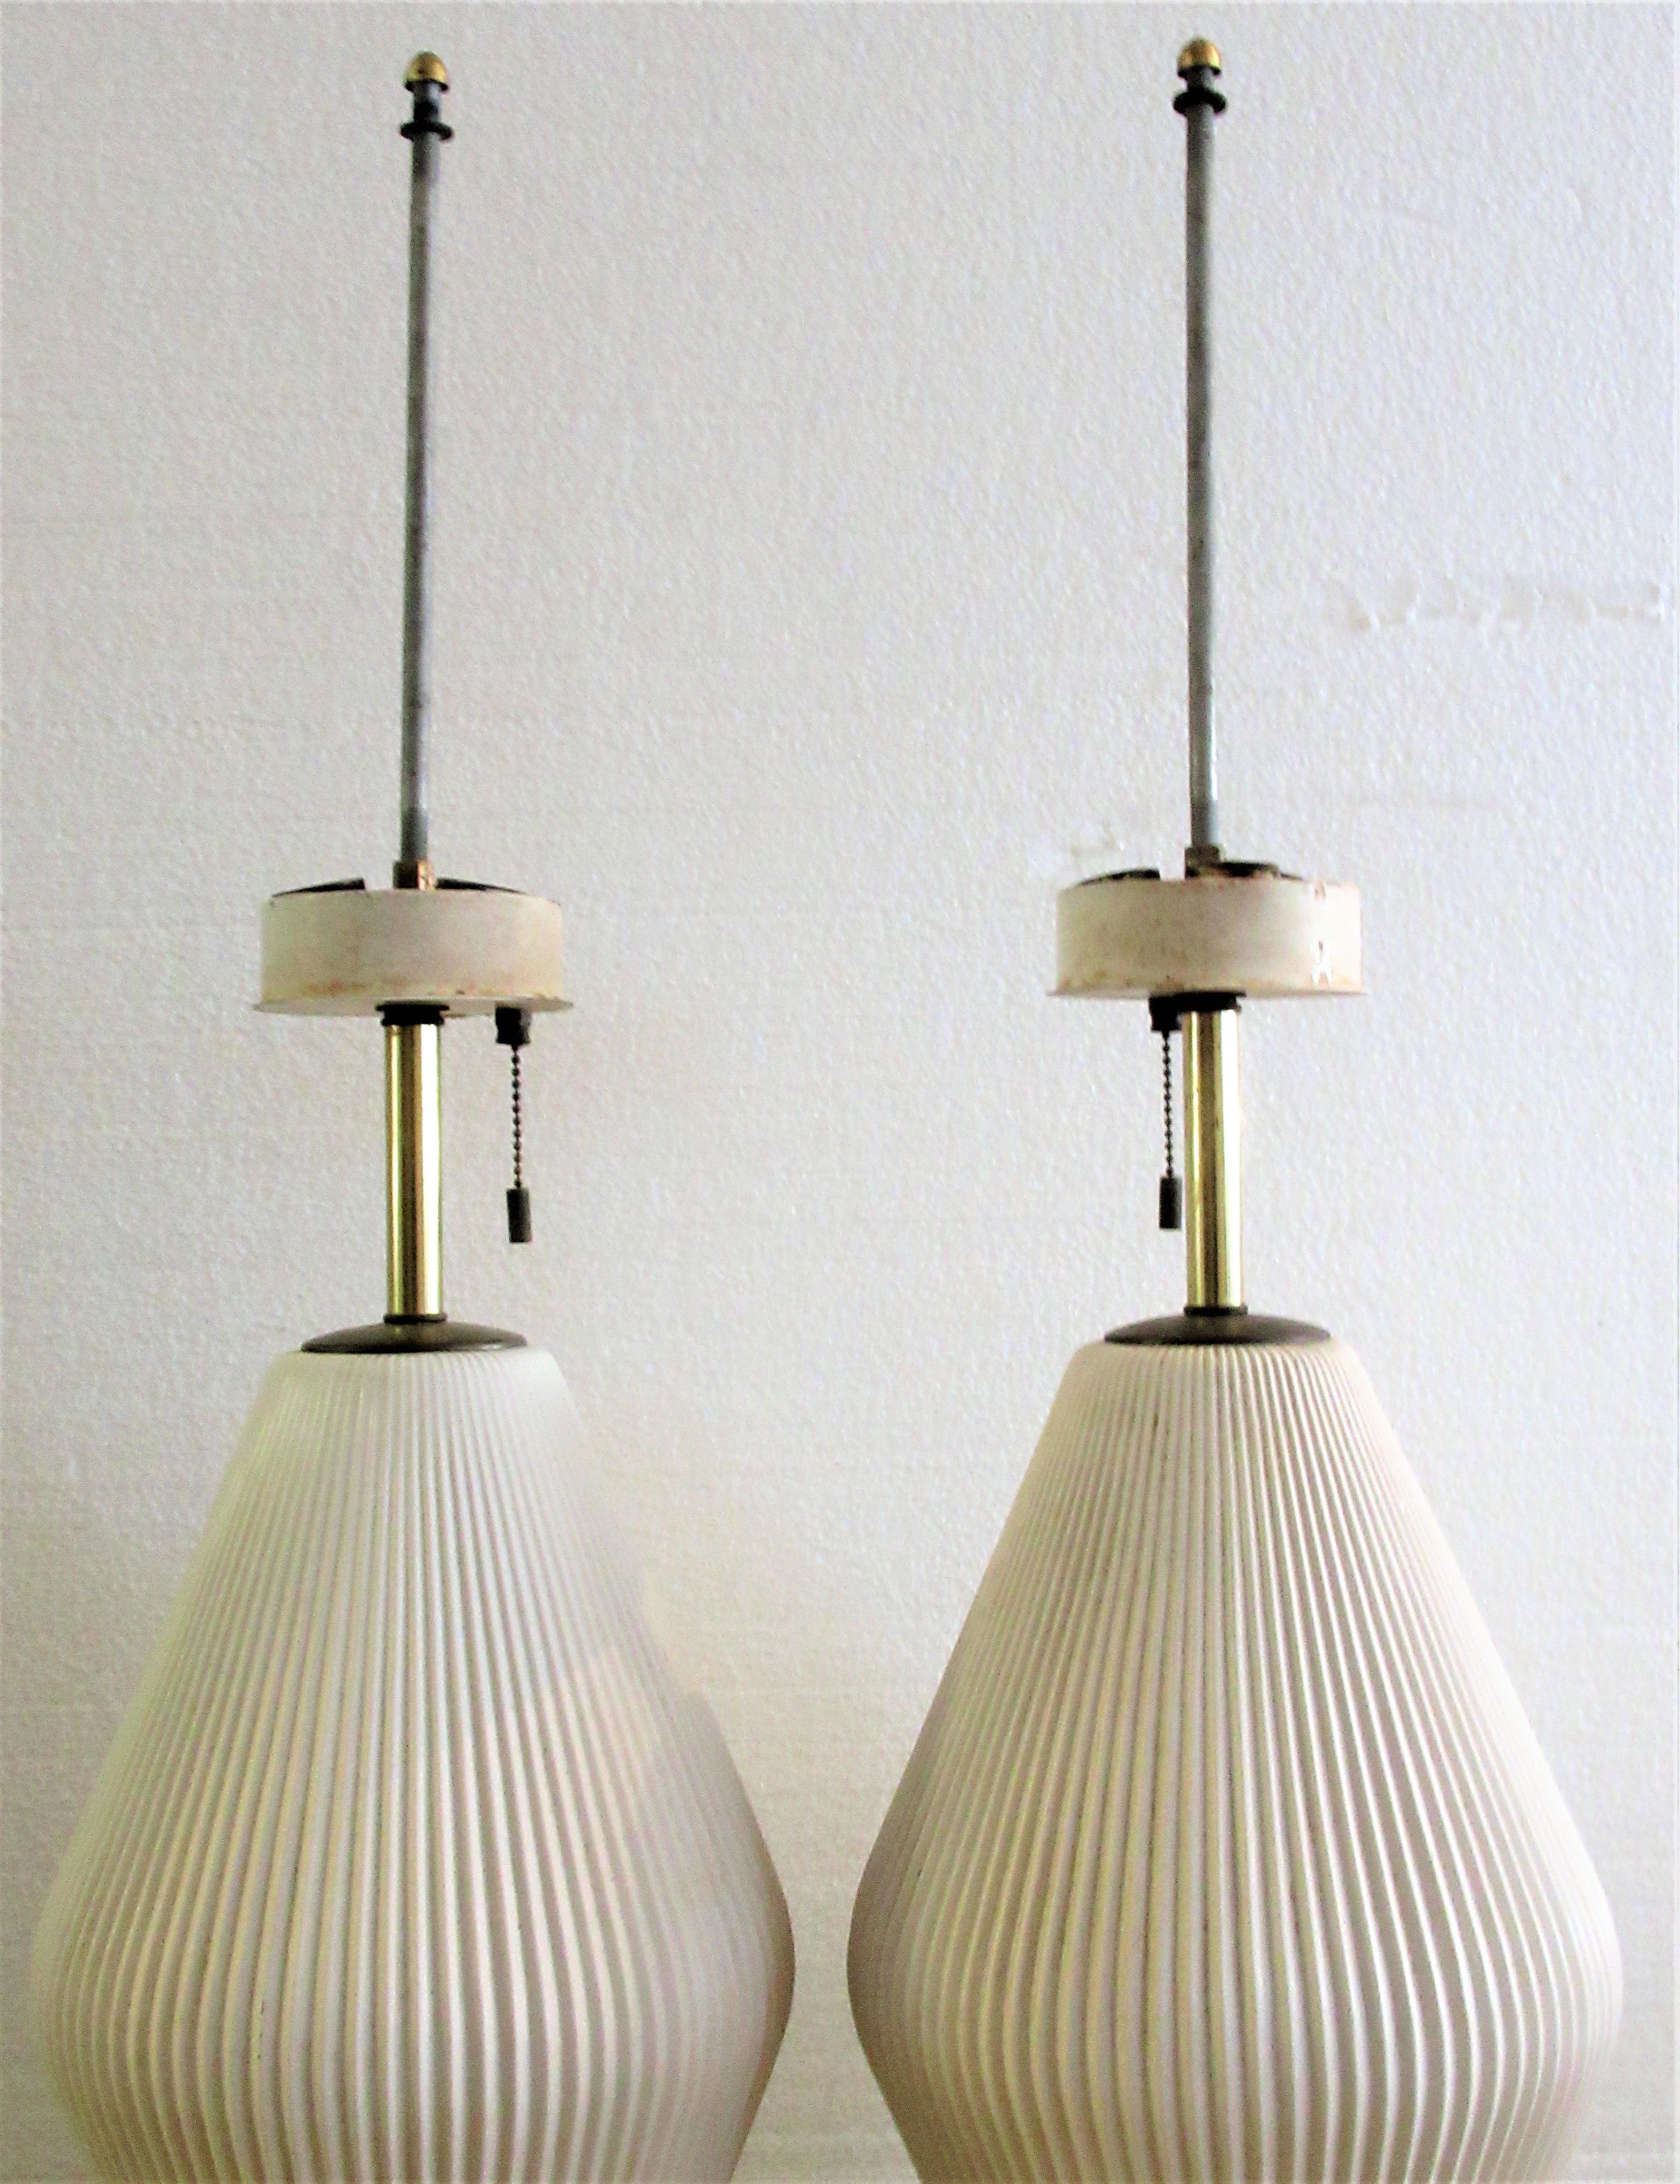 A great looking pair of fluted white porcelain and brass table lamps by Gerald Thurston for Lightolier in good all original condition, circa 1950s. Look at pictures and read condition report.